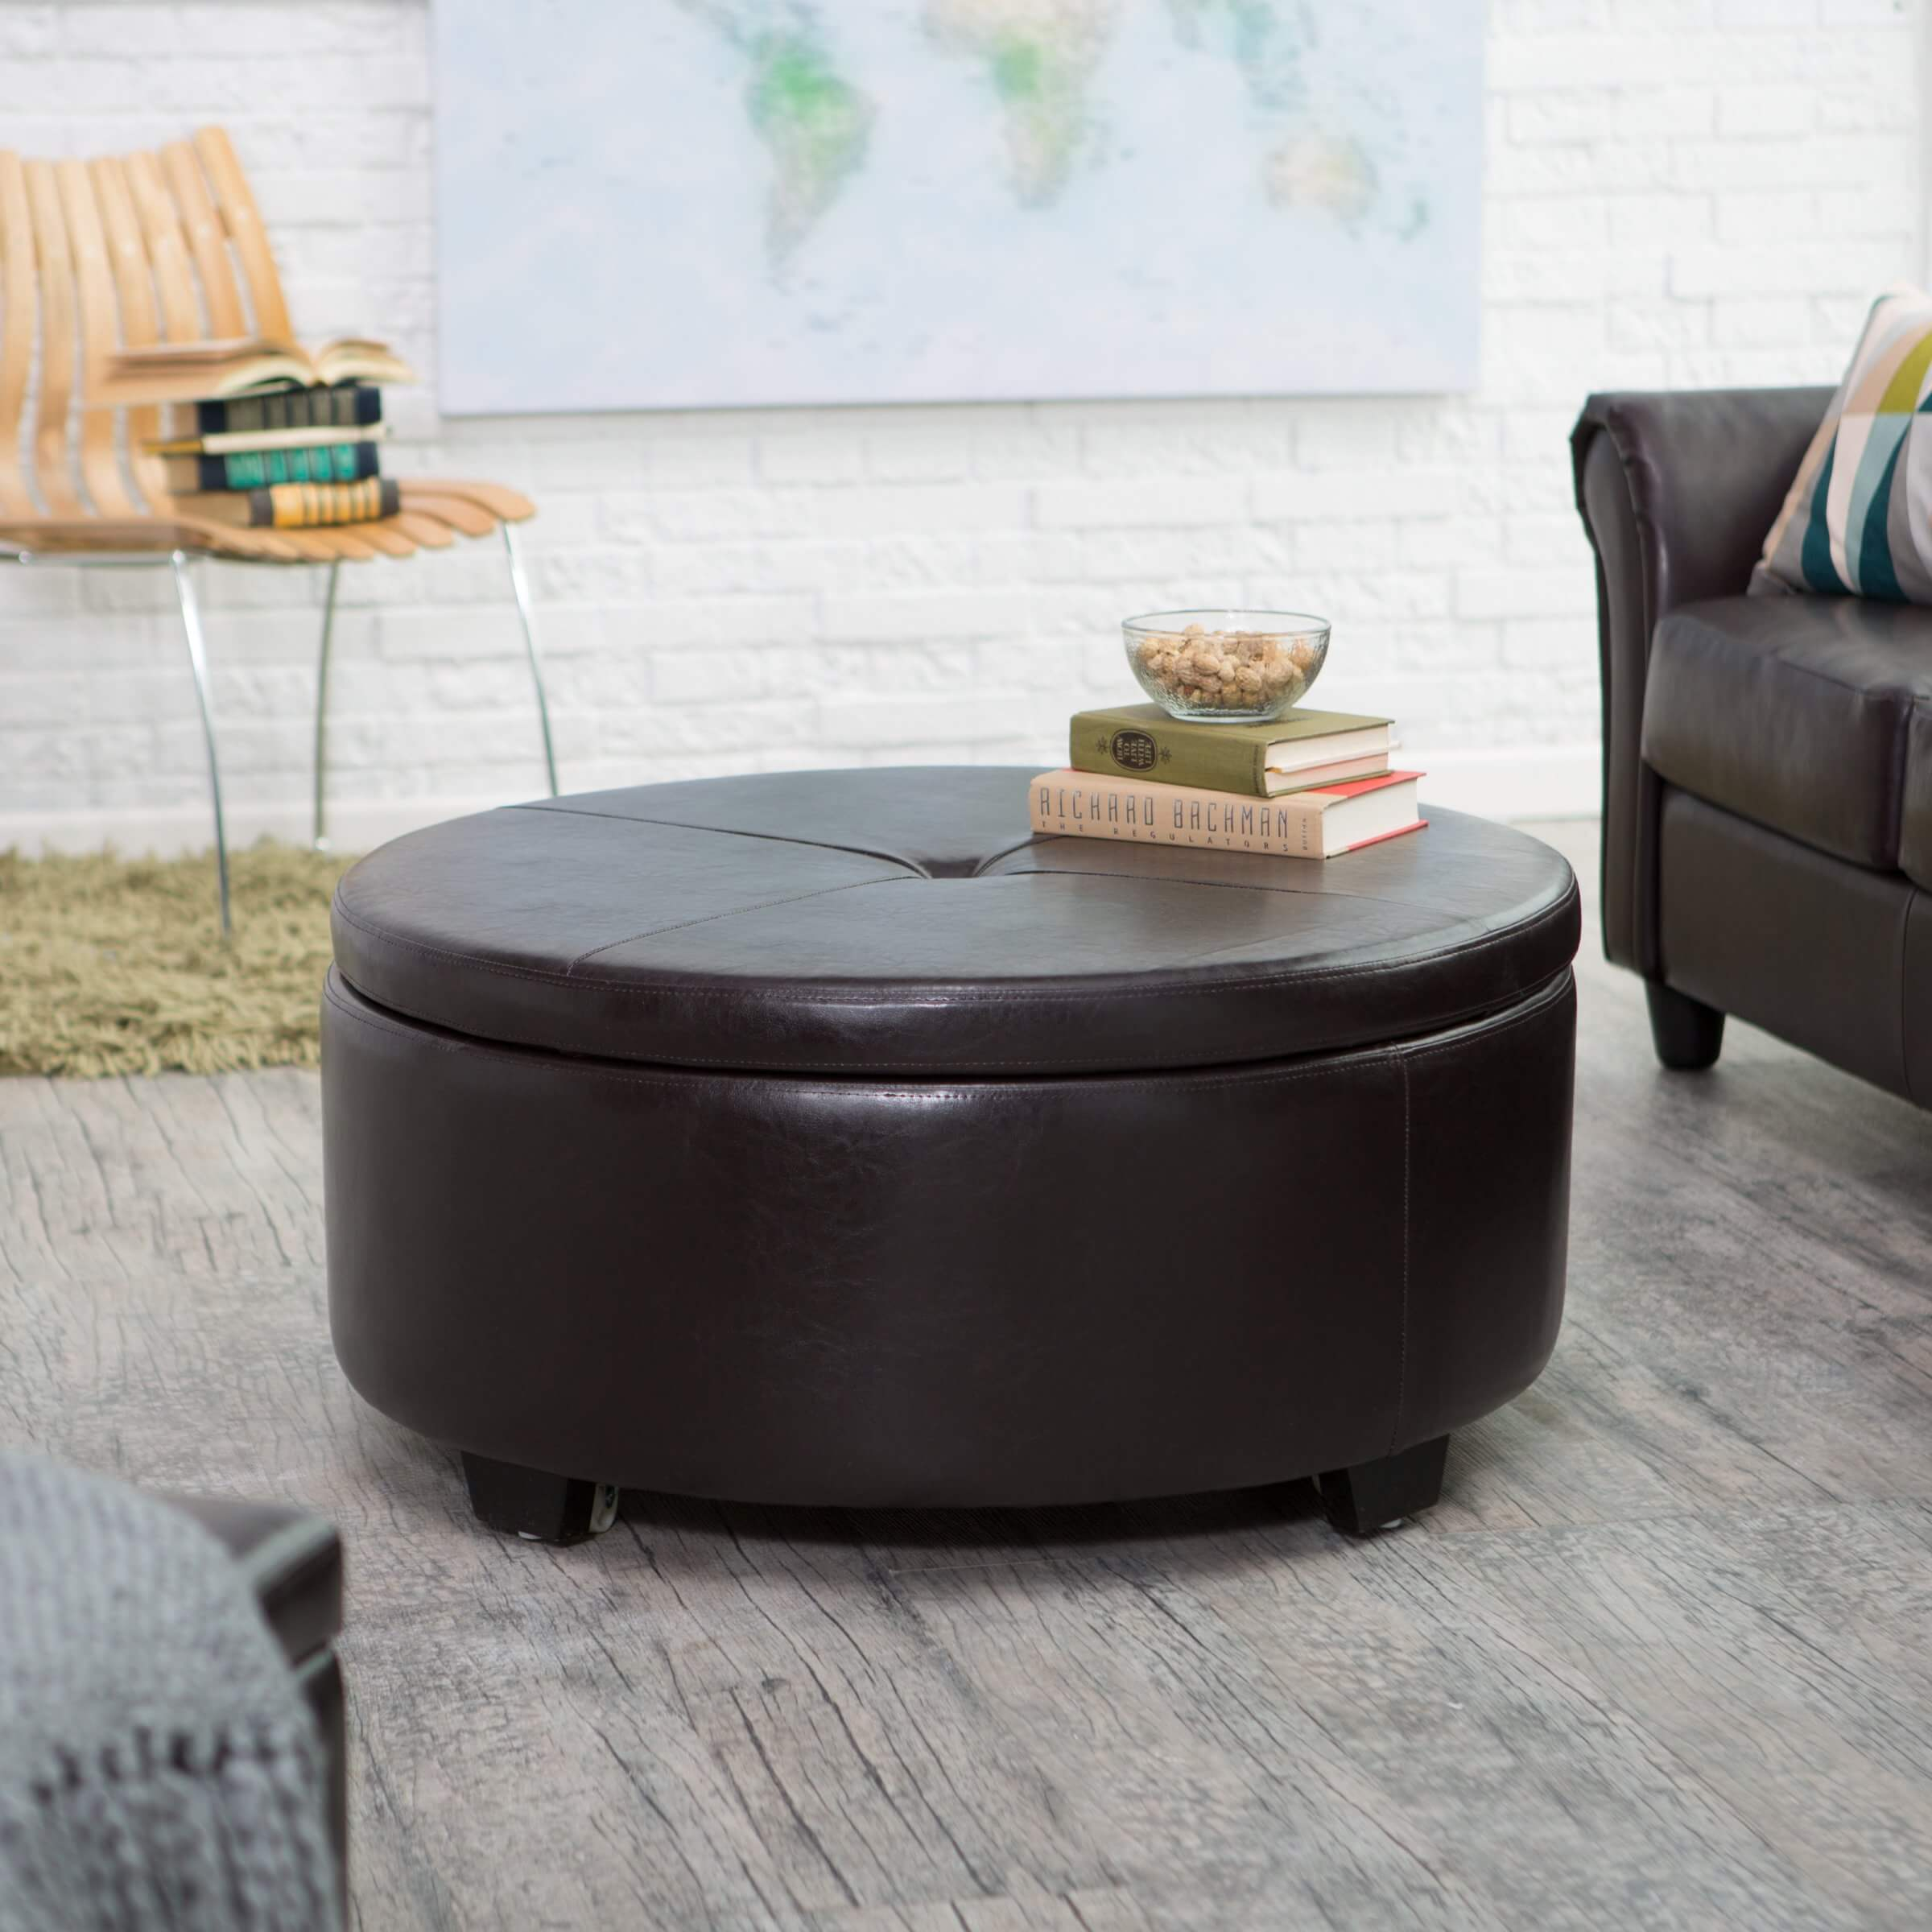 36 Top Brown Leather Ottoman Coffee Tables for size 2400 X 2400